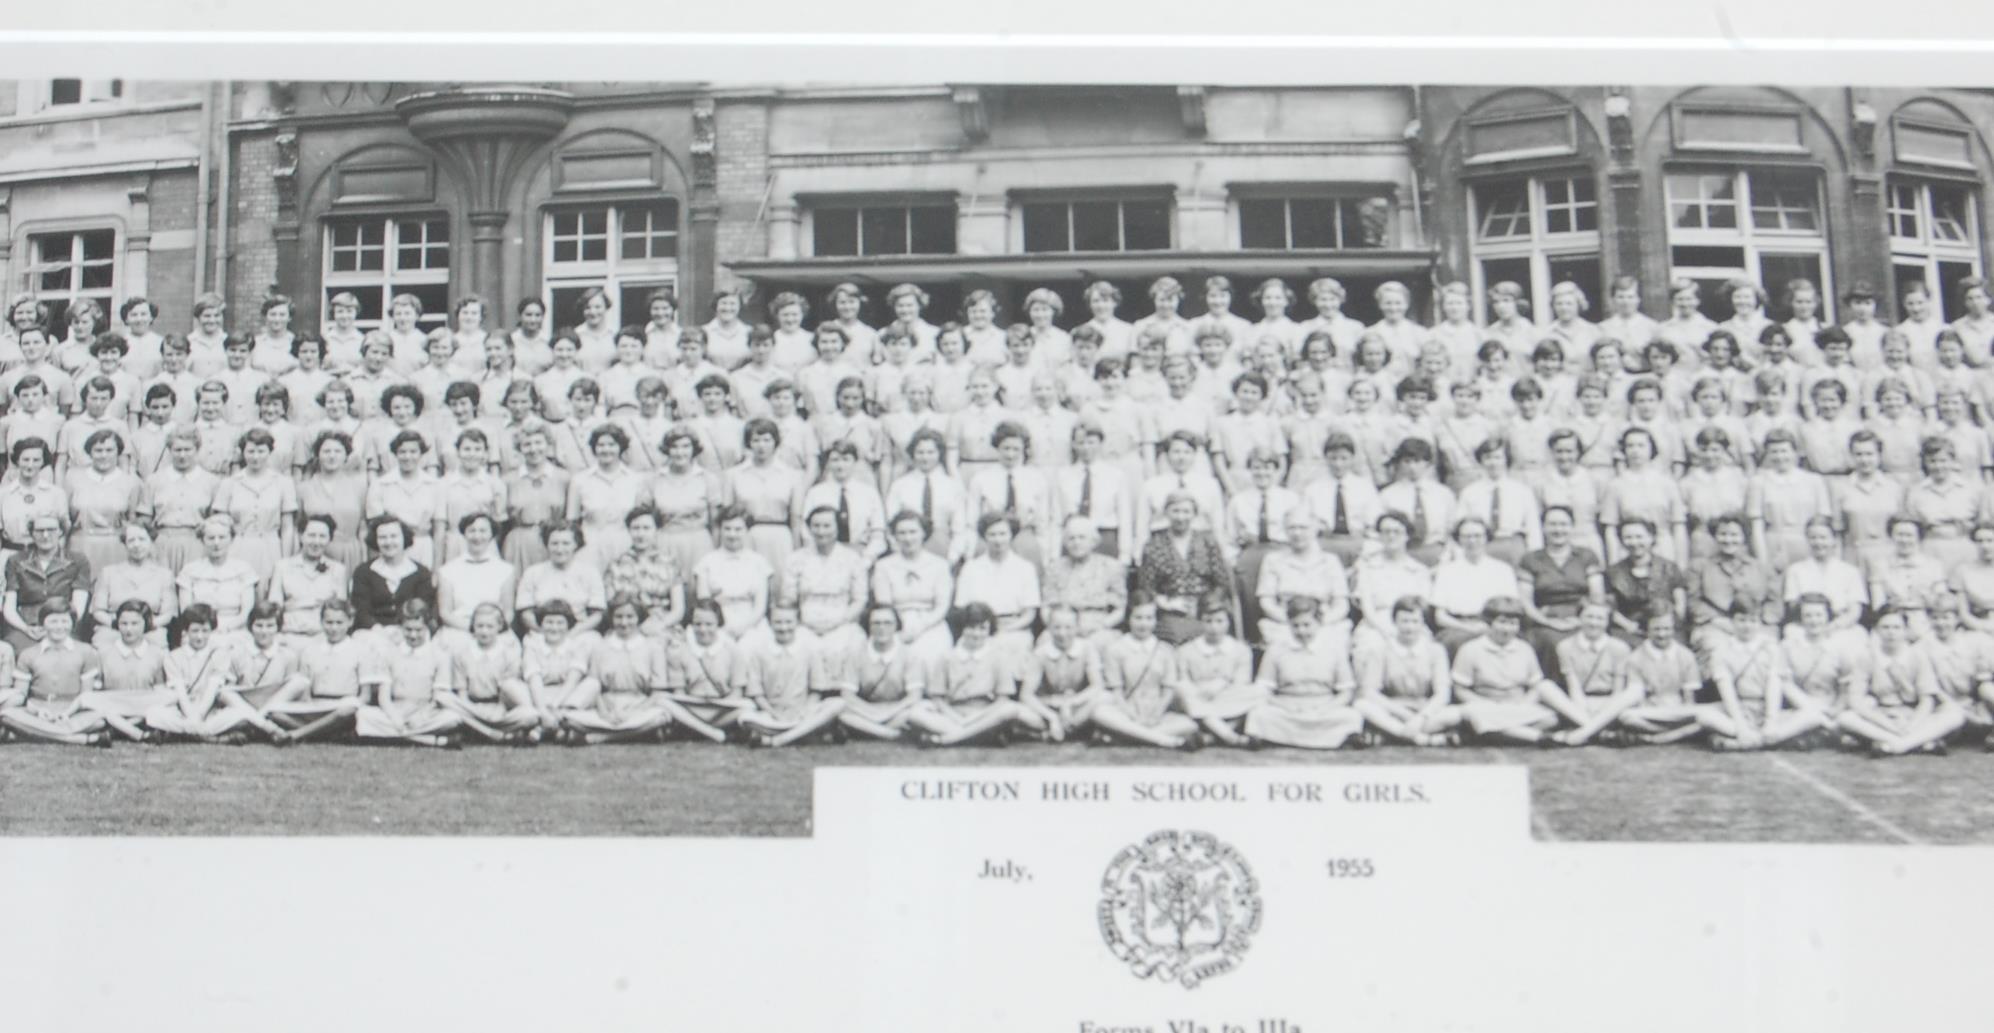 COOLECTION OF FOUR SCHOOL PHOTGRAPHS OF CLIFTON HIGH SCHOOL FOR GIRLS - Image 3 of 18